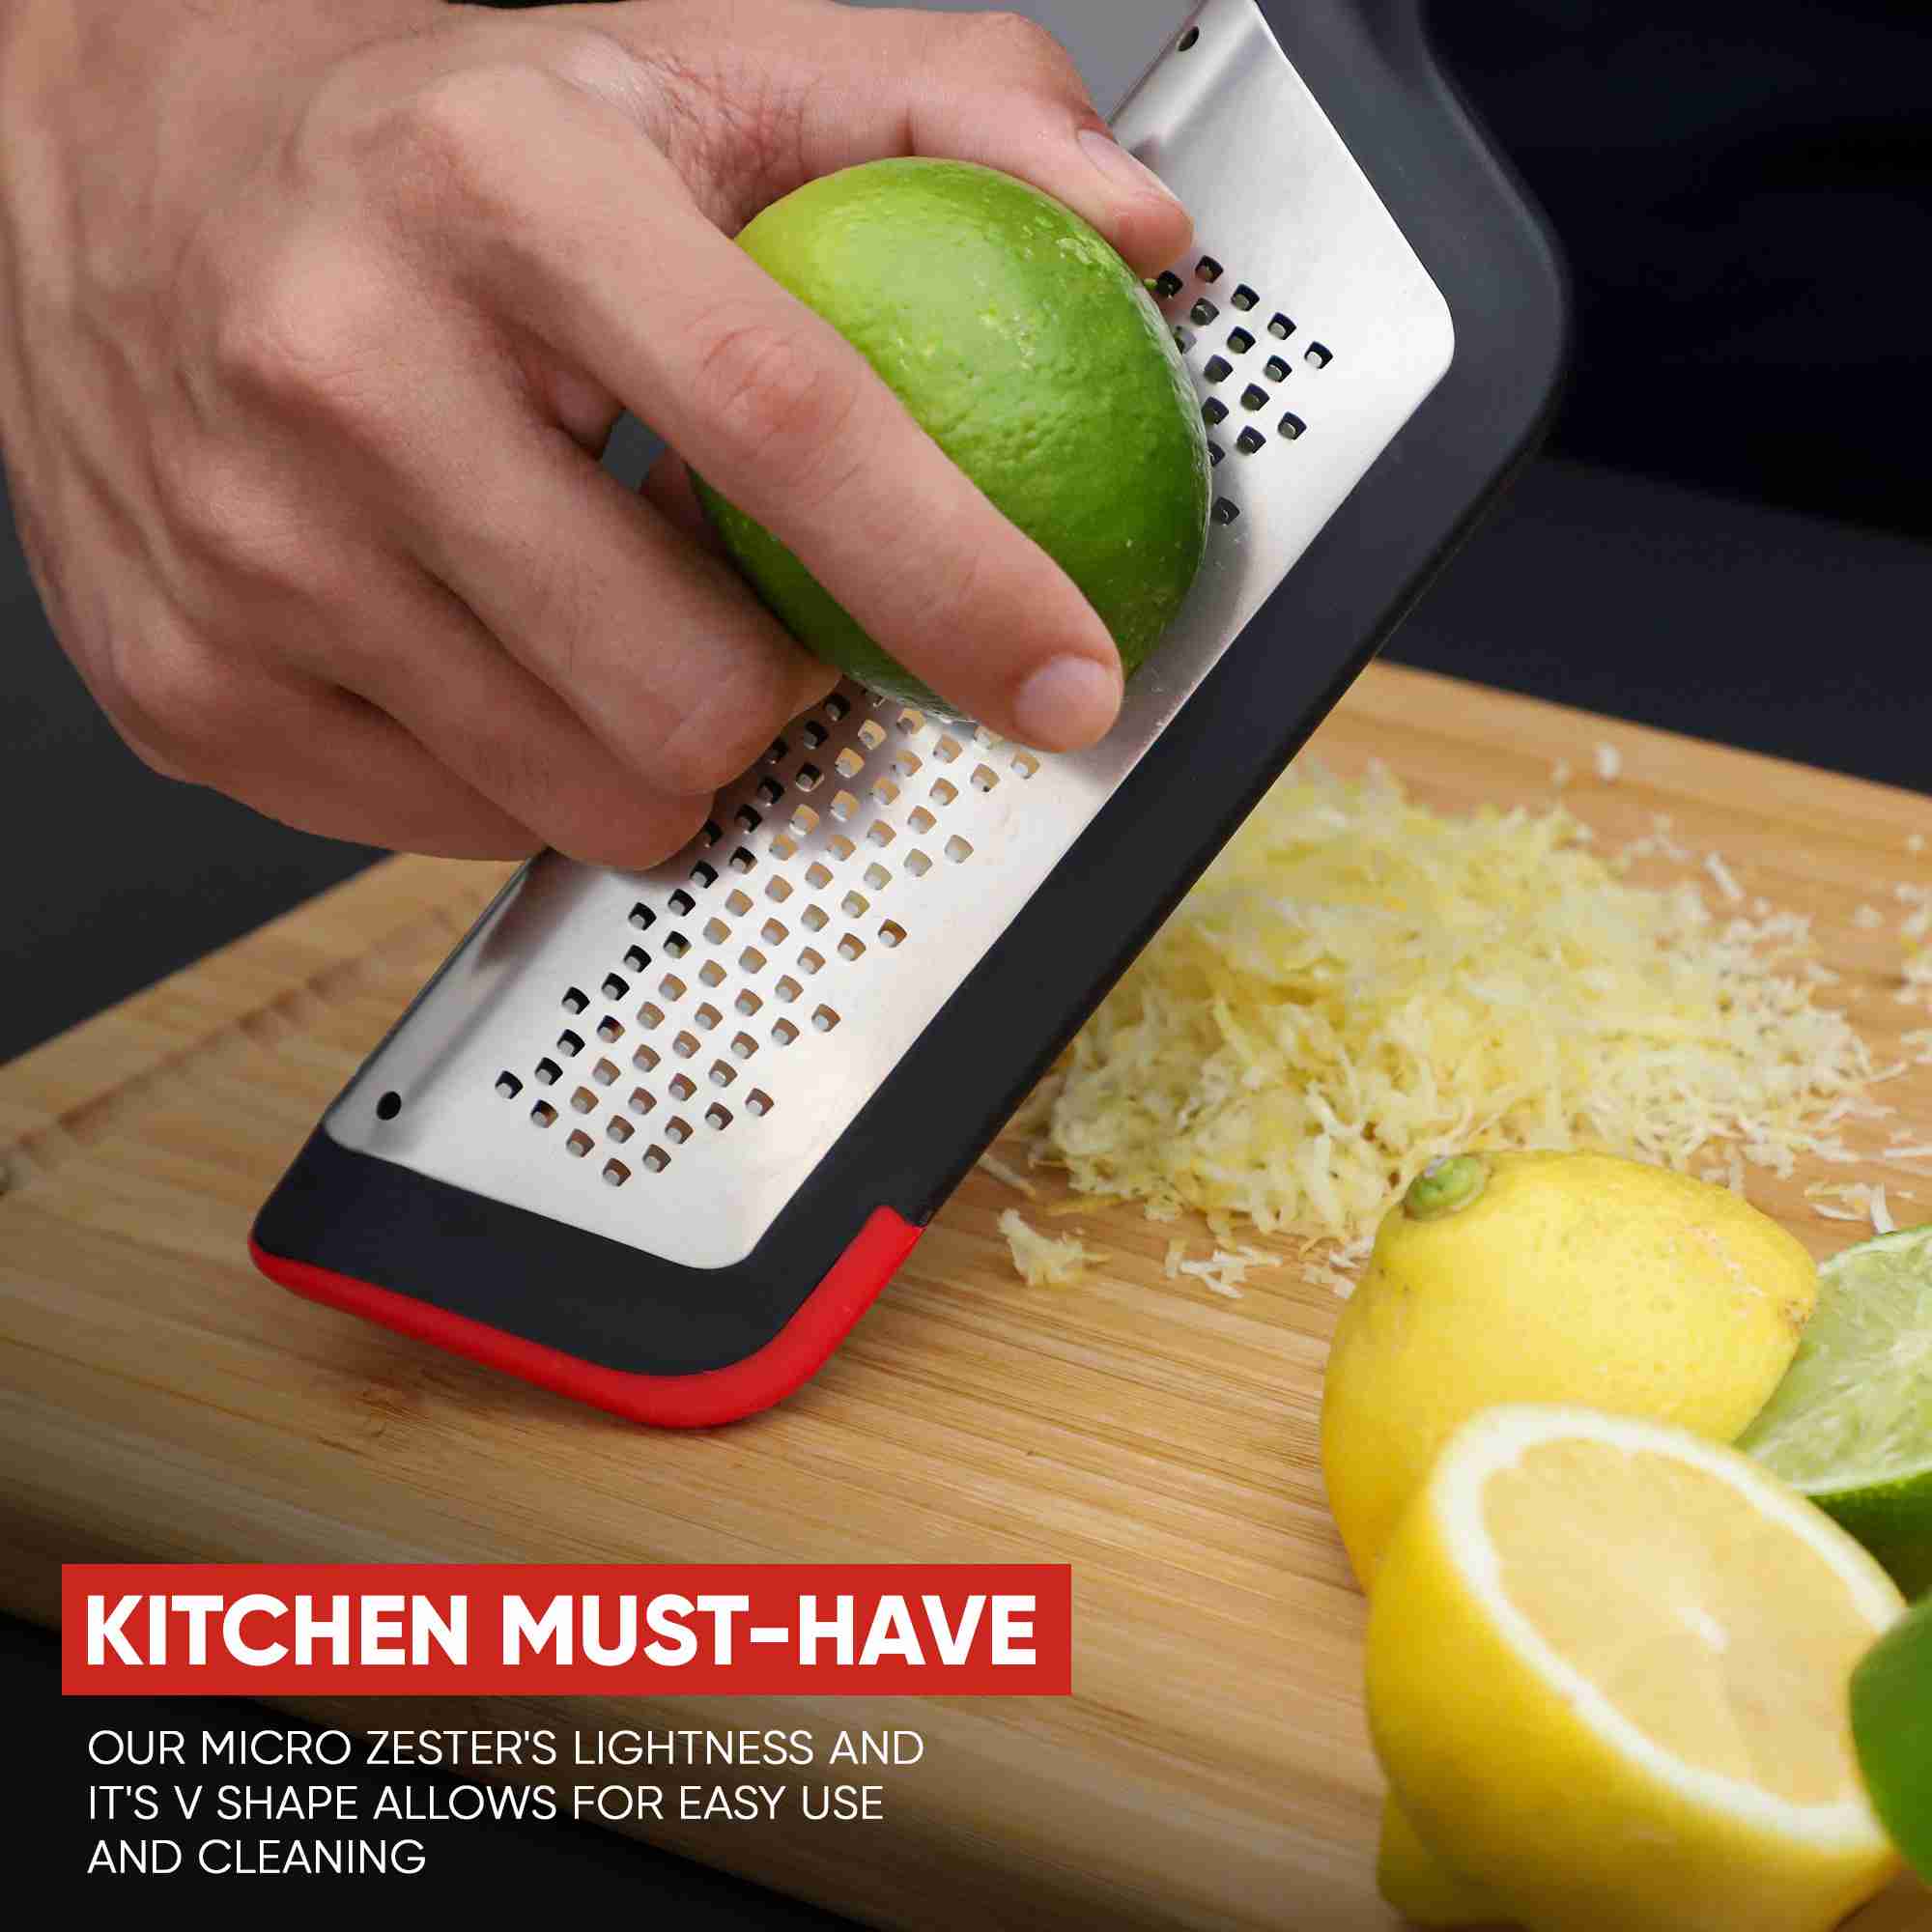 cheese-grater-lemon-zester-chocolate-kitchen-tools-vegetable with cash back rebate